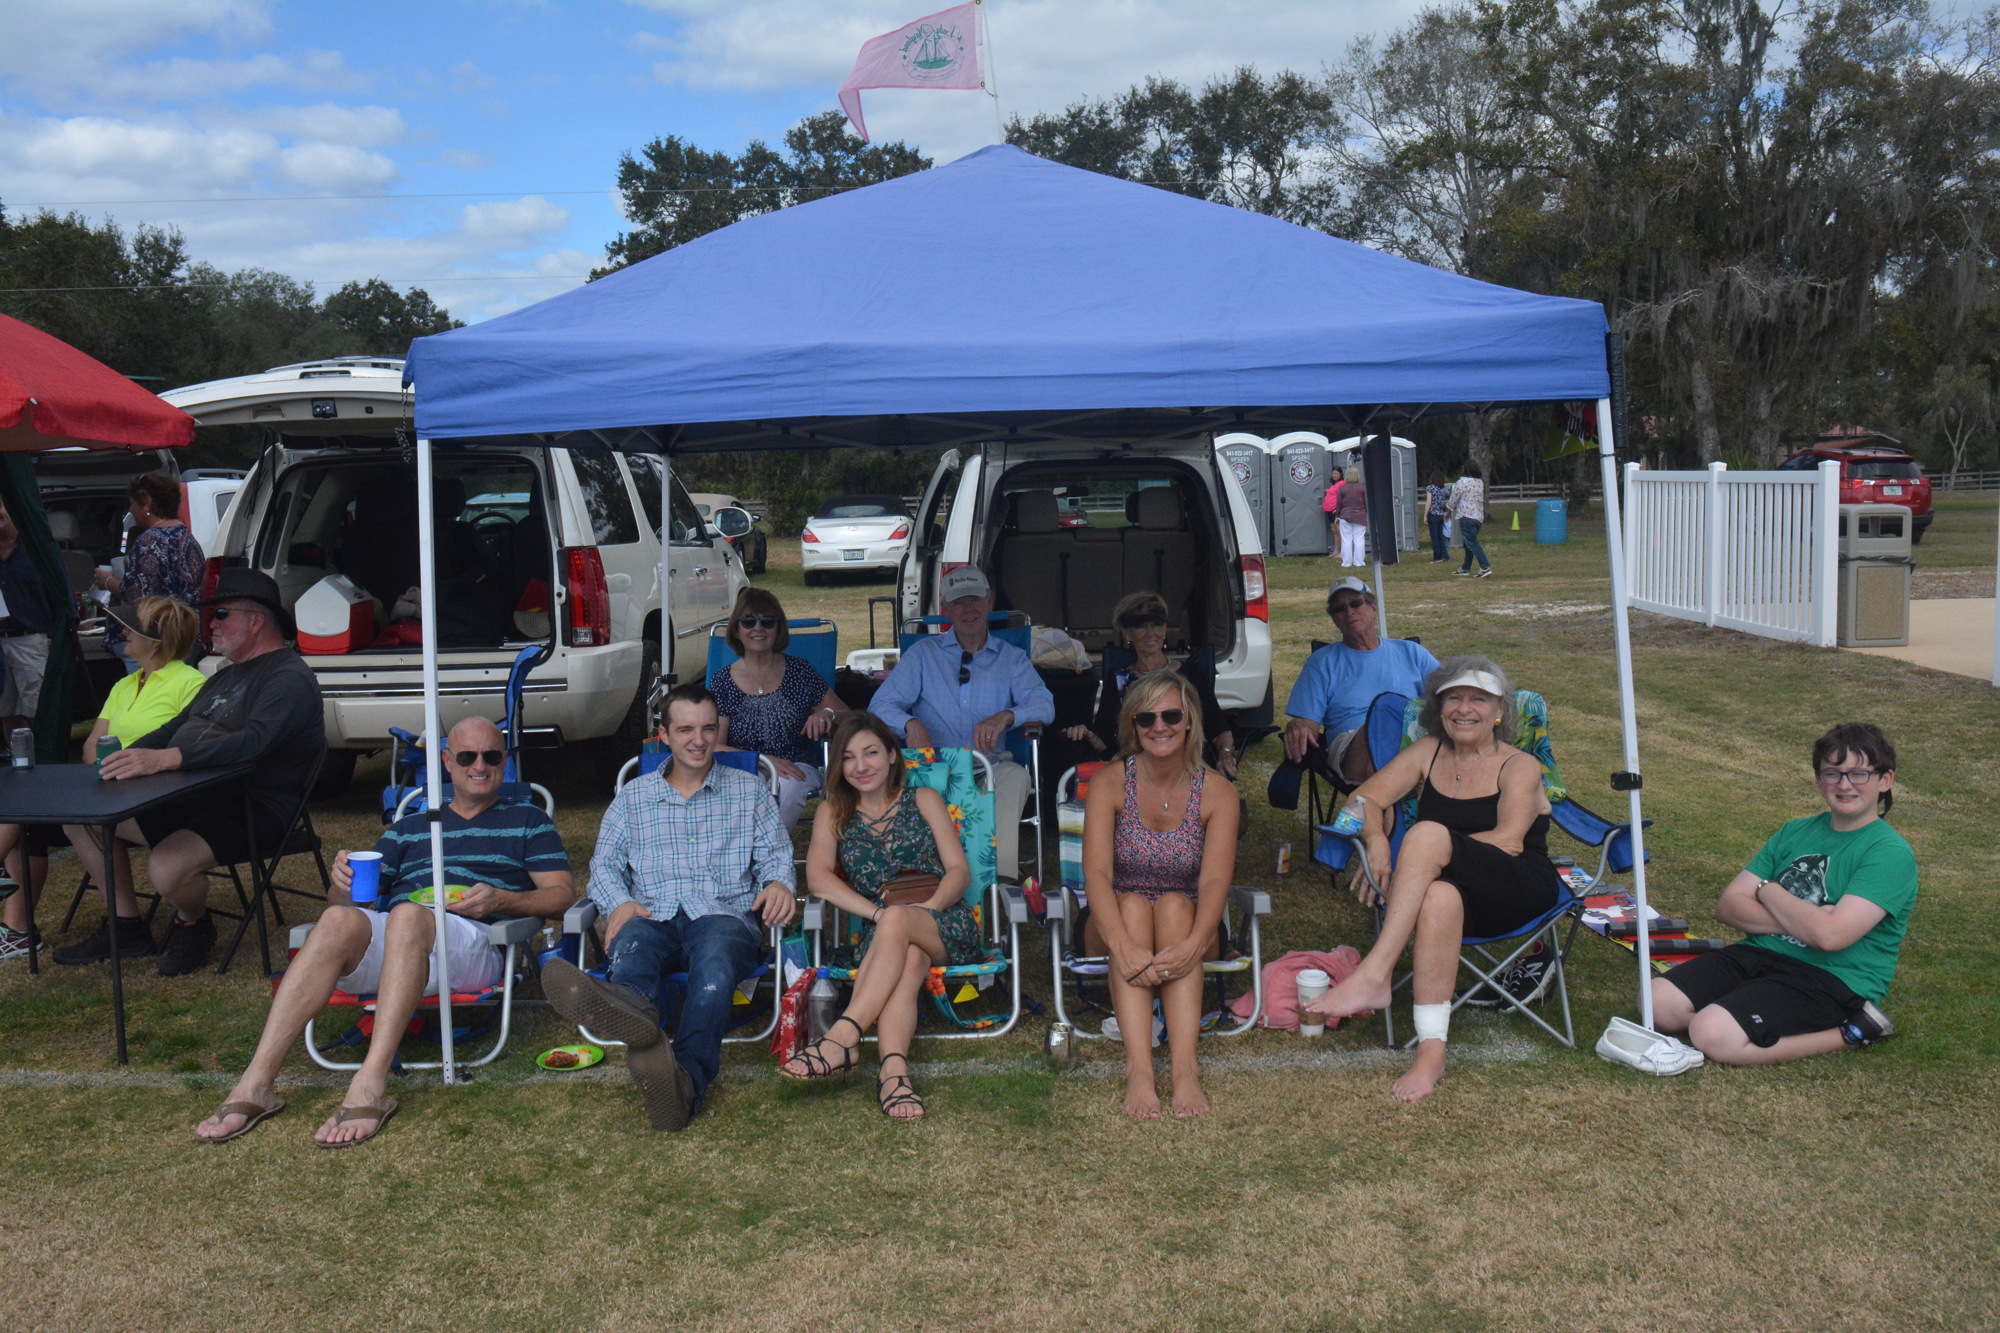 The Chukker Crumbs tailgating group.